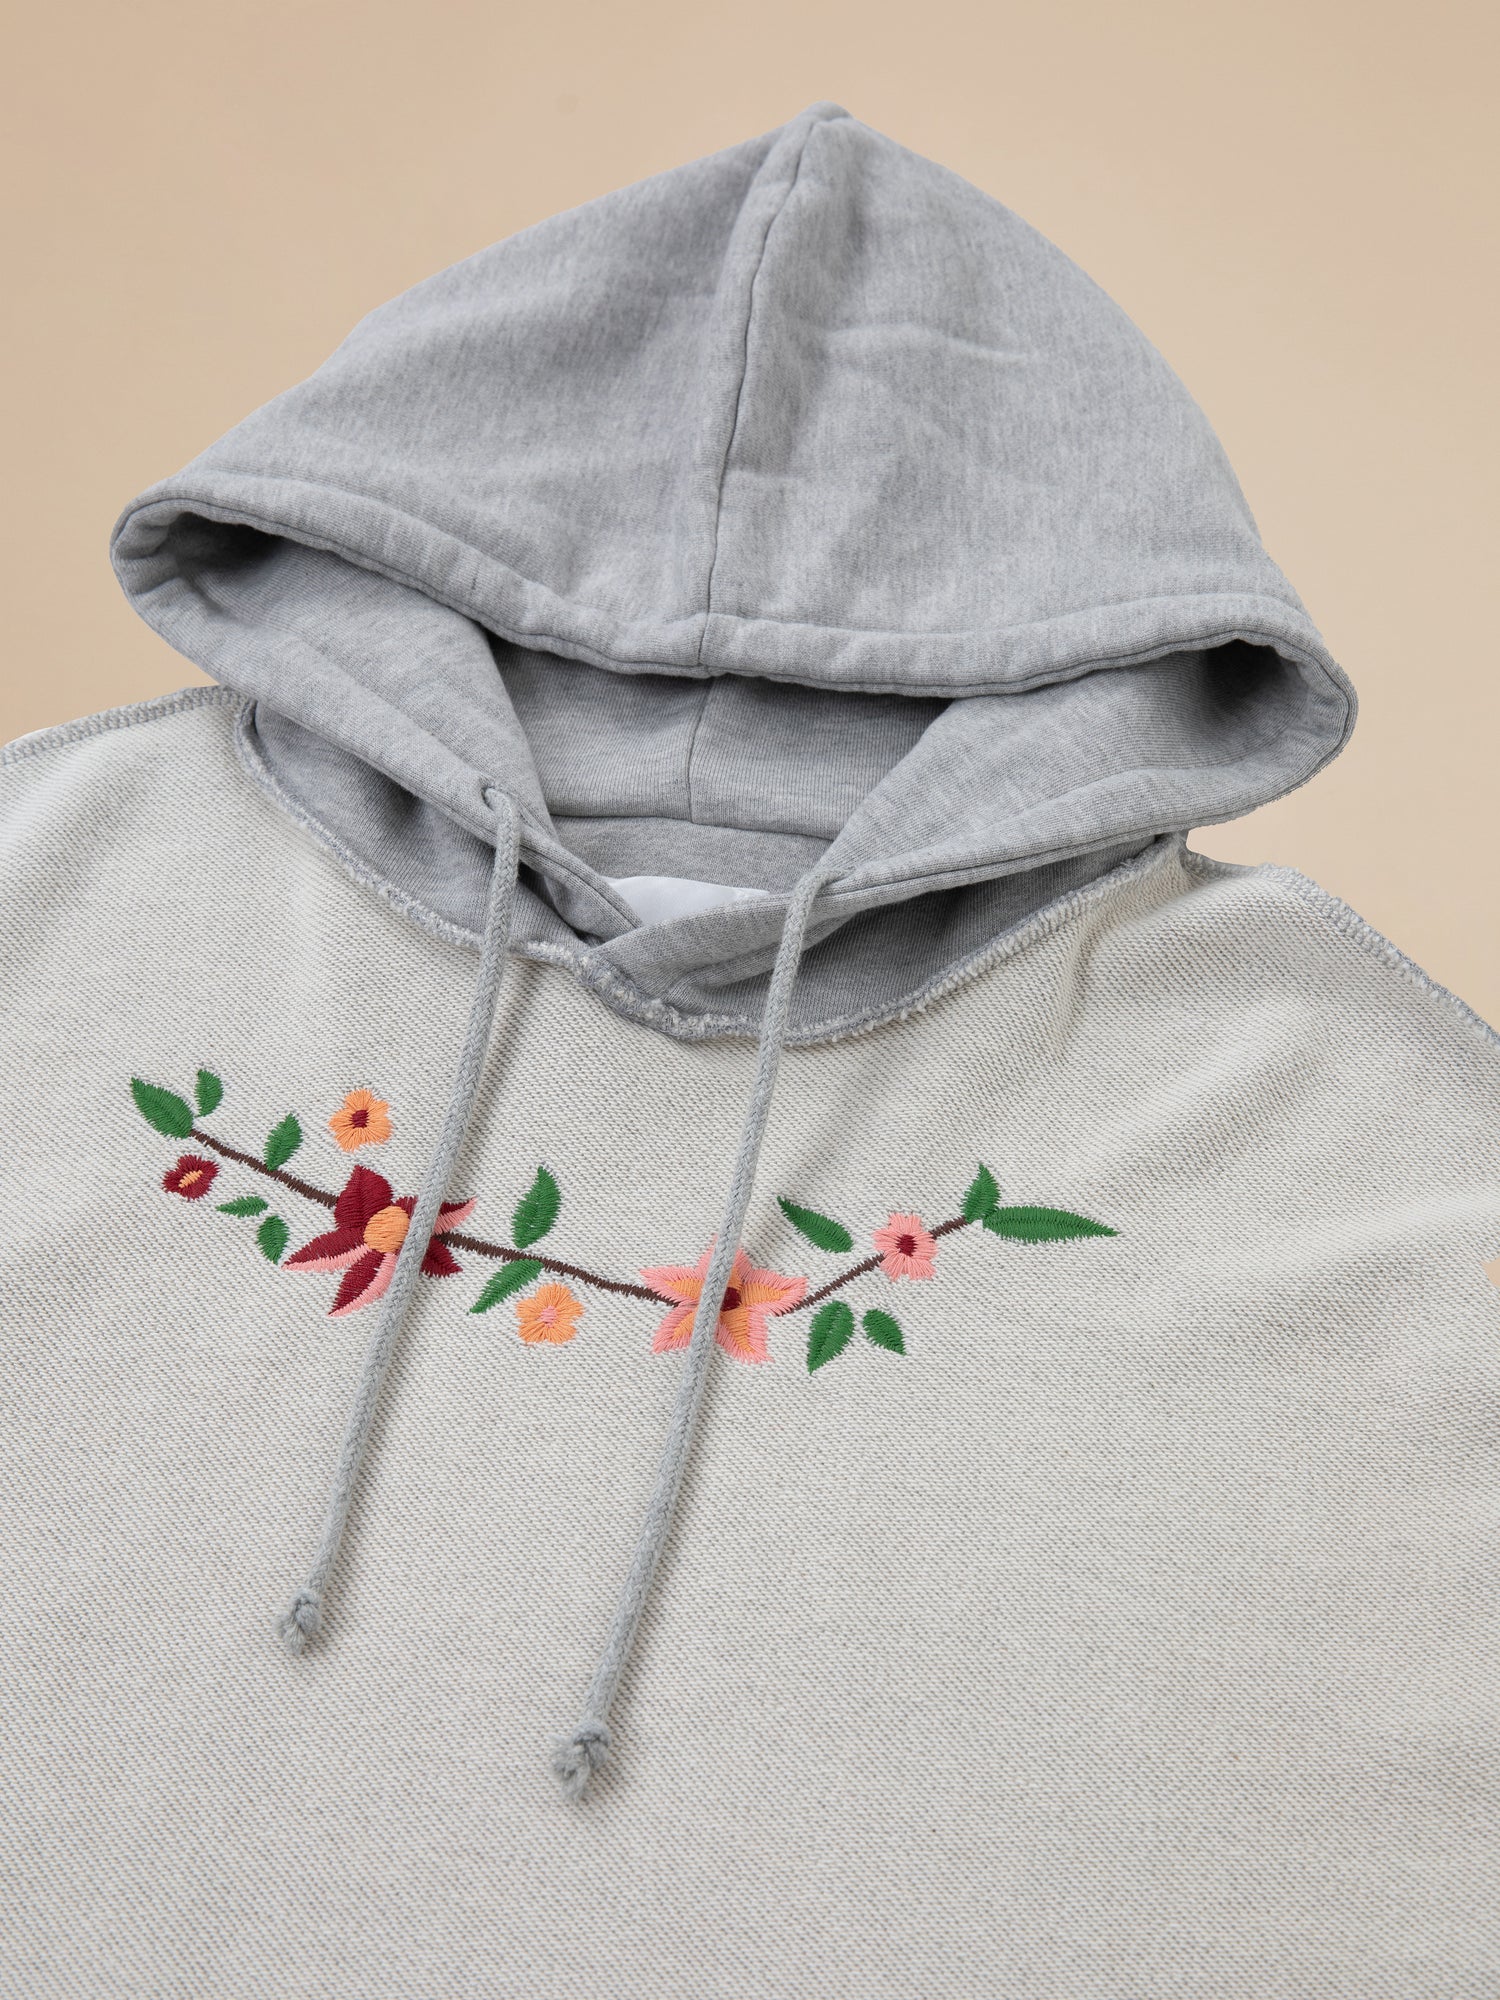 An Inverse Flower Petal Hoodie with flowers on it. (Brand: Found)